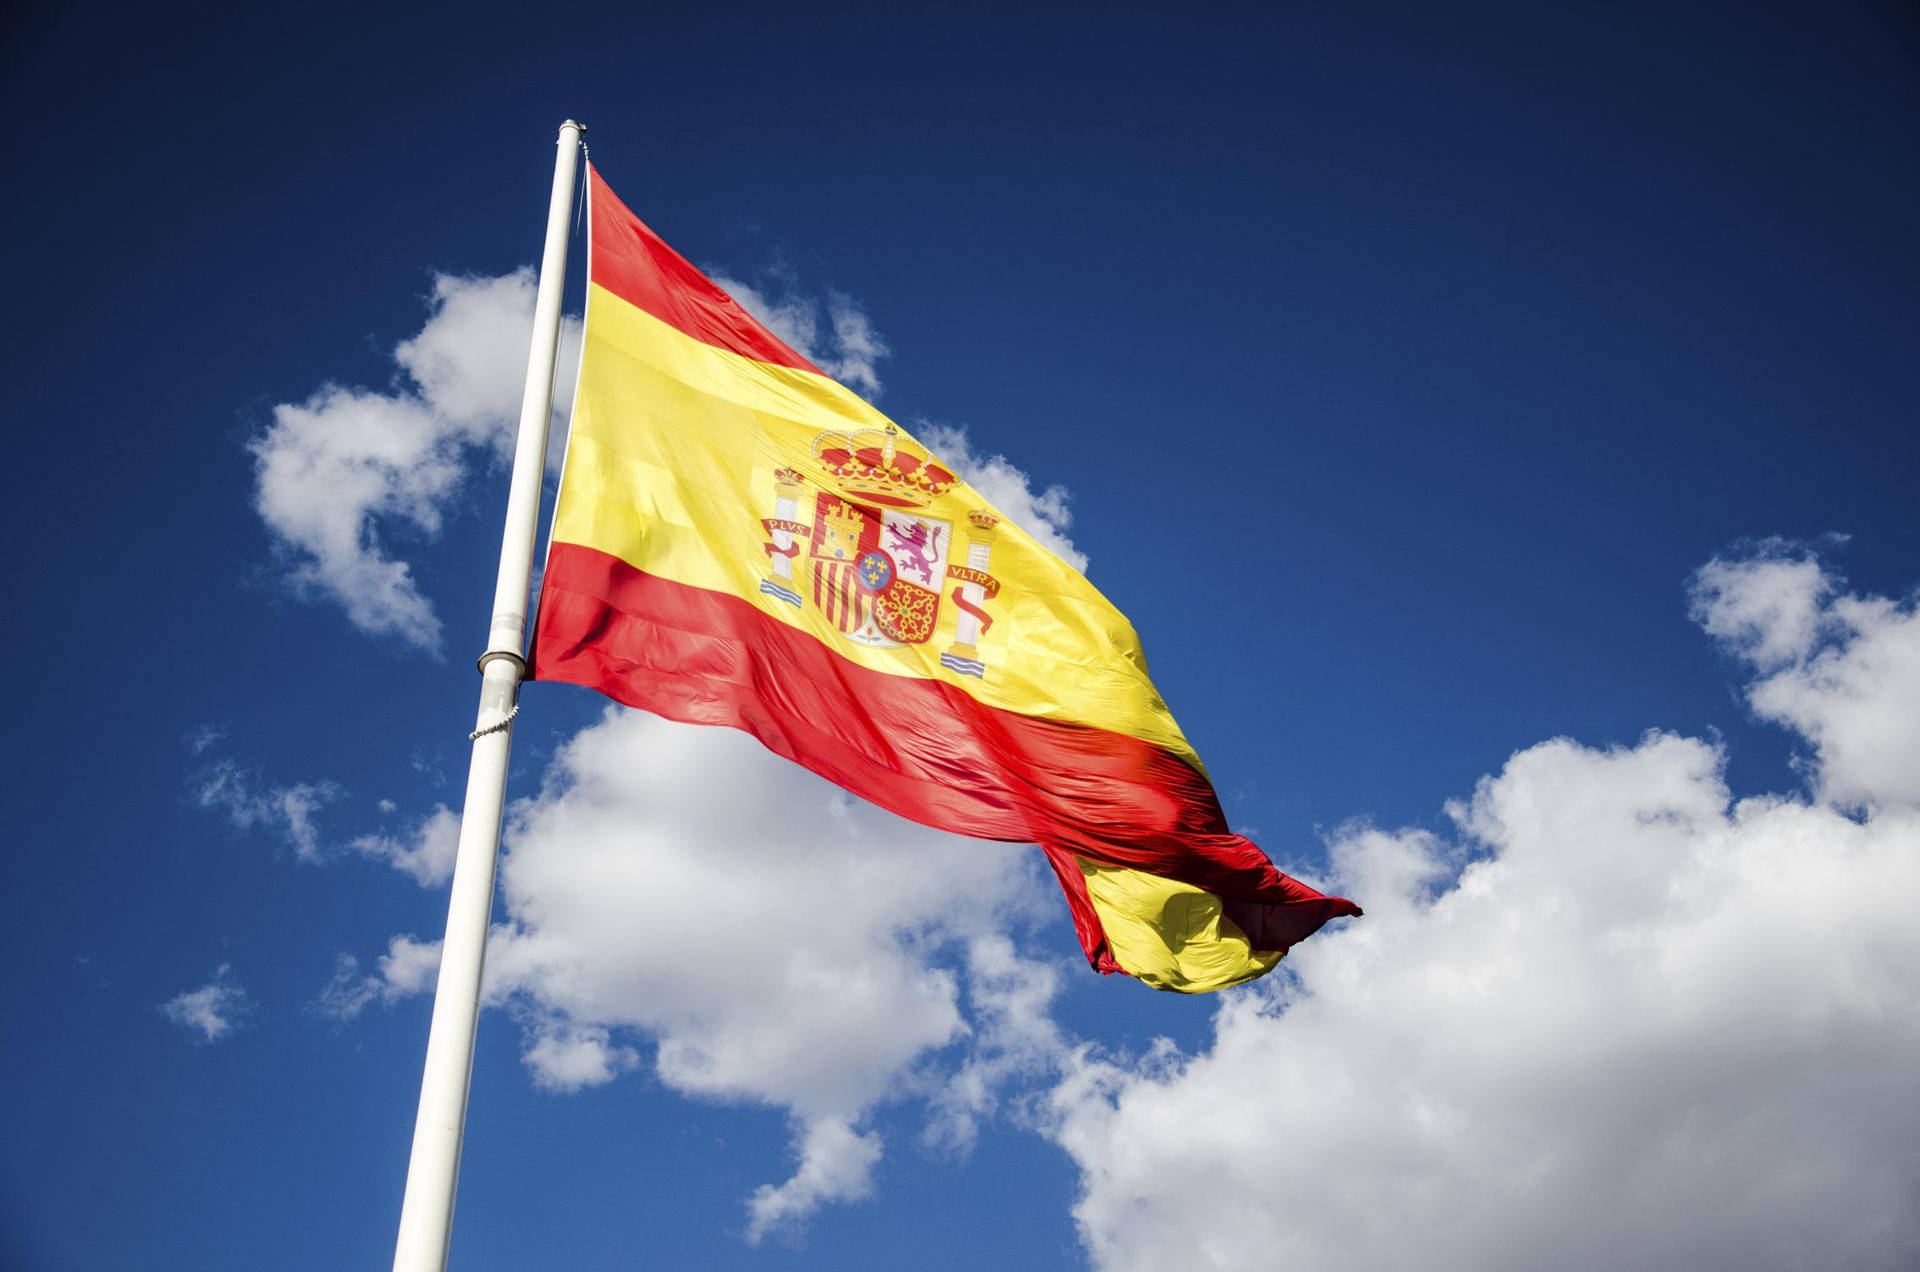 "The Vibrant Waves of the Spanish Flag" Wallpaper